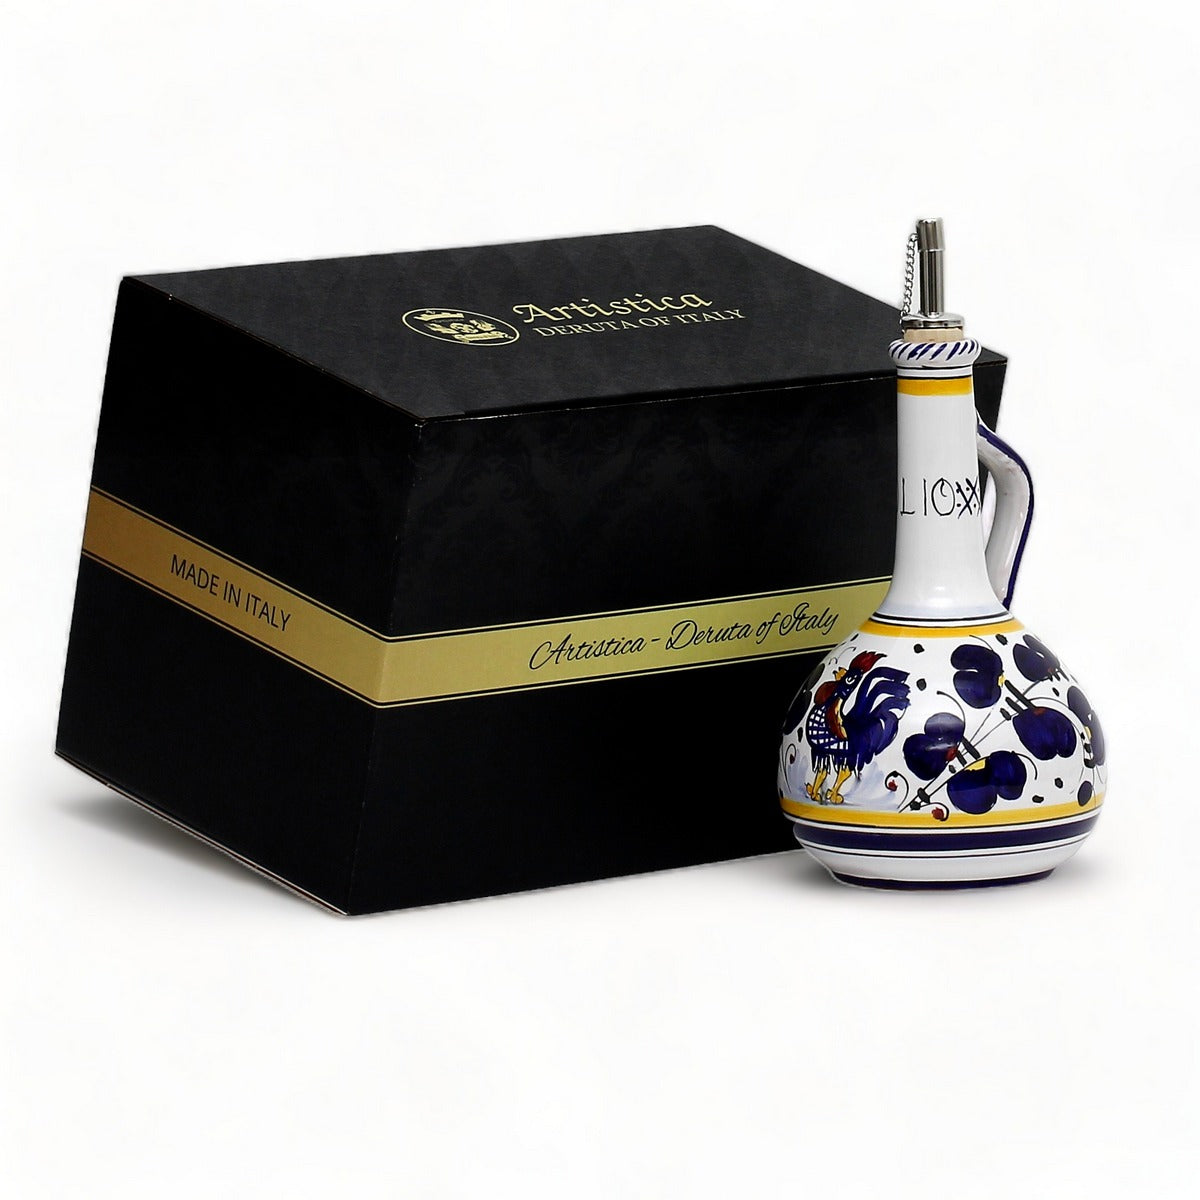 GIFT BOX: With authentic Deruta hand painted ceramic - Olive Oil Dispenser Blue Rooster Design